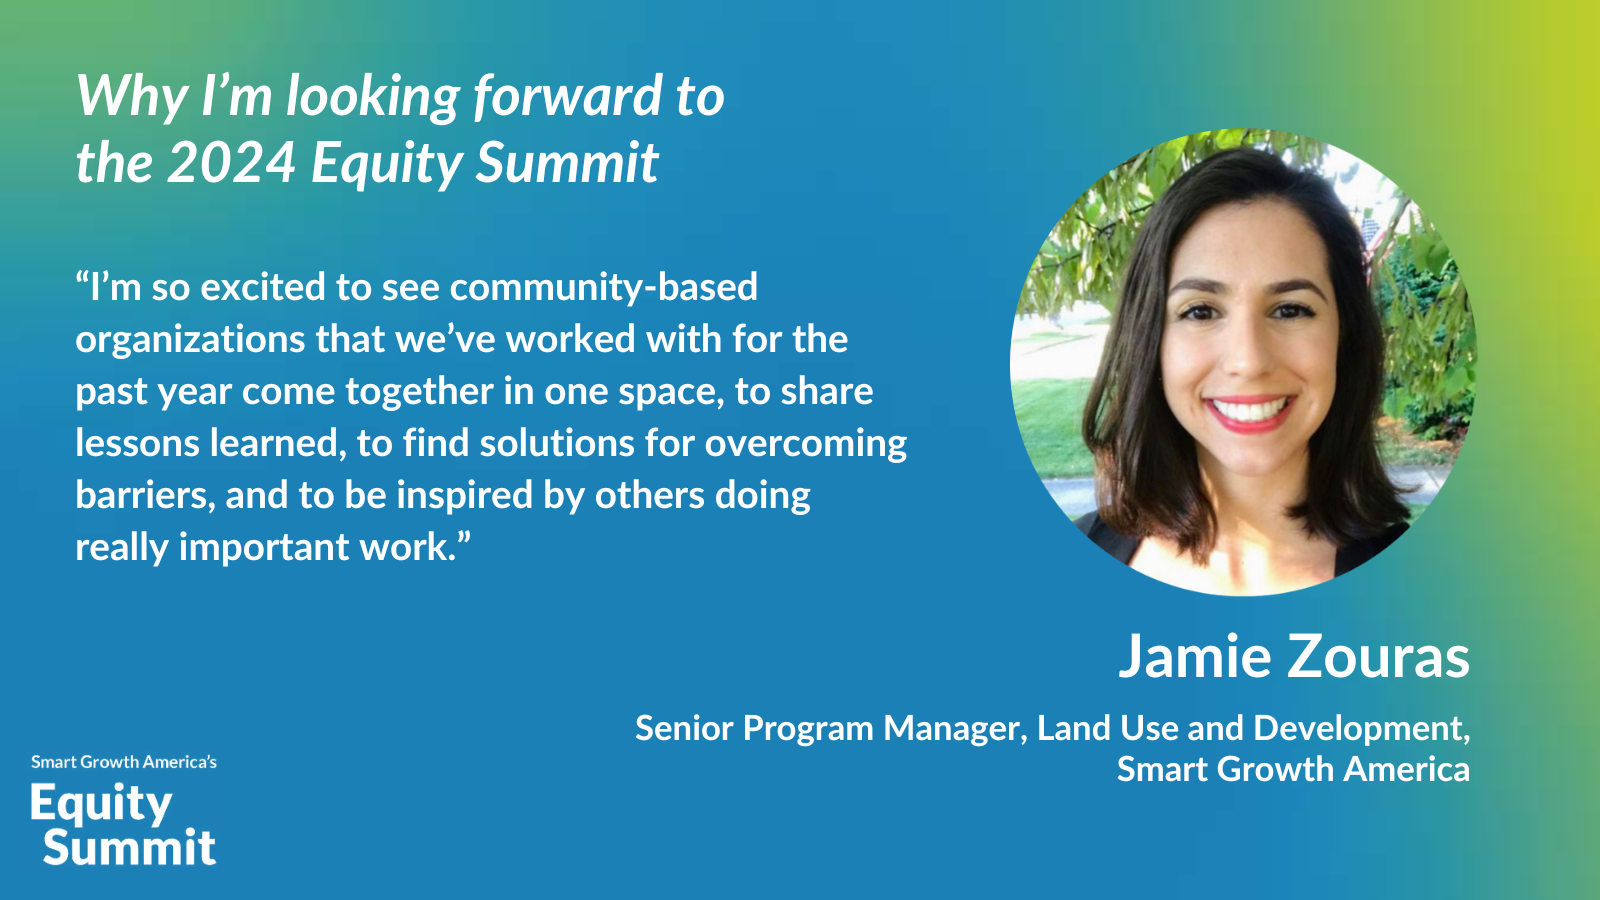 Jamie Zouras, Senior Program Manager of Land Use and Development, says "I'm so excited to see community-based organizations that we've worked with for the past year come together in one space, to share lessons learned, to find solutions for overcoming barriers, and to be inspired by others doing really important work."